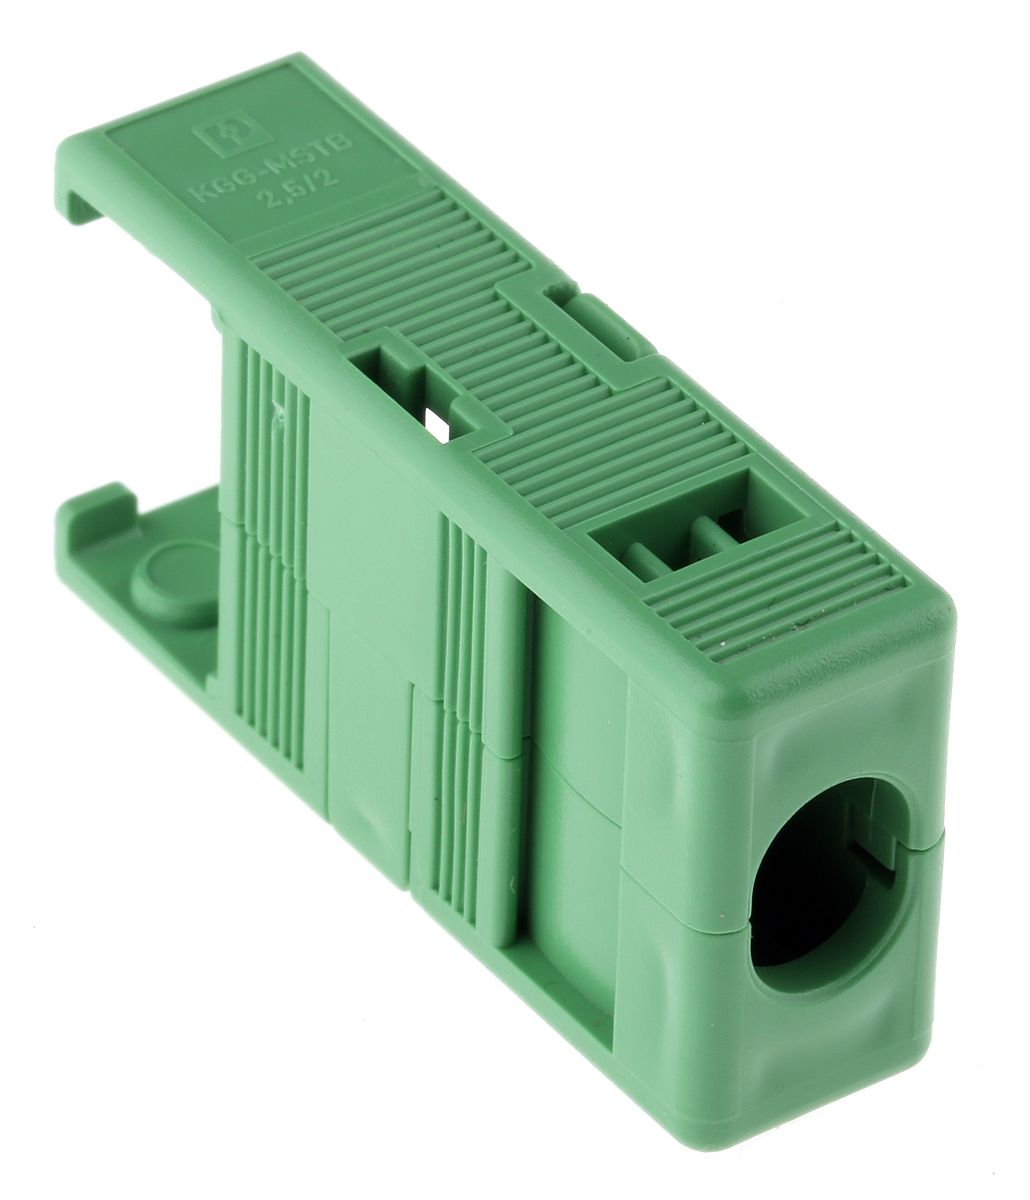 KGG-MSTB 2.5 ABS Terminal Block Housing, Cable Mount